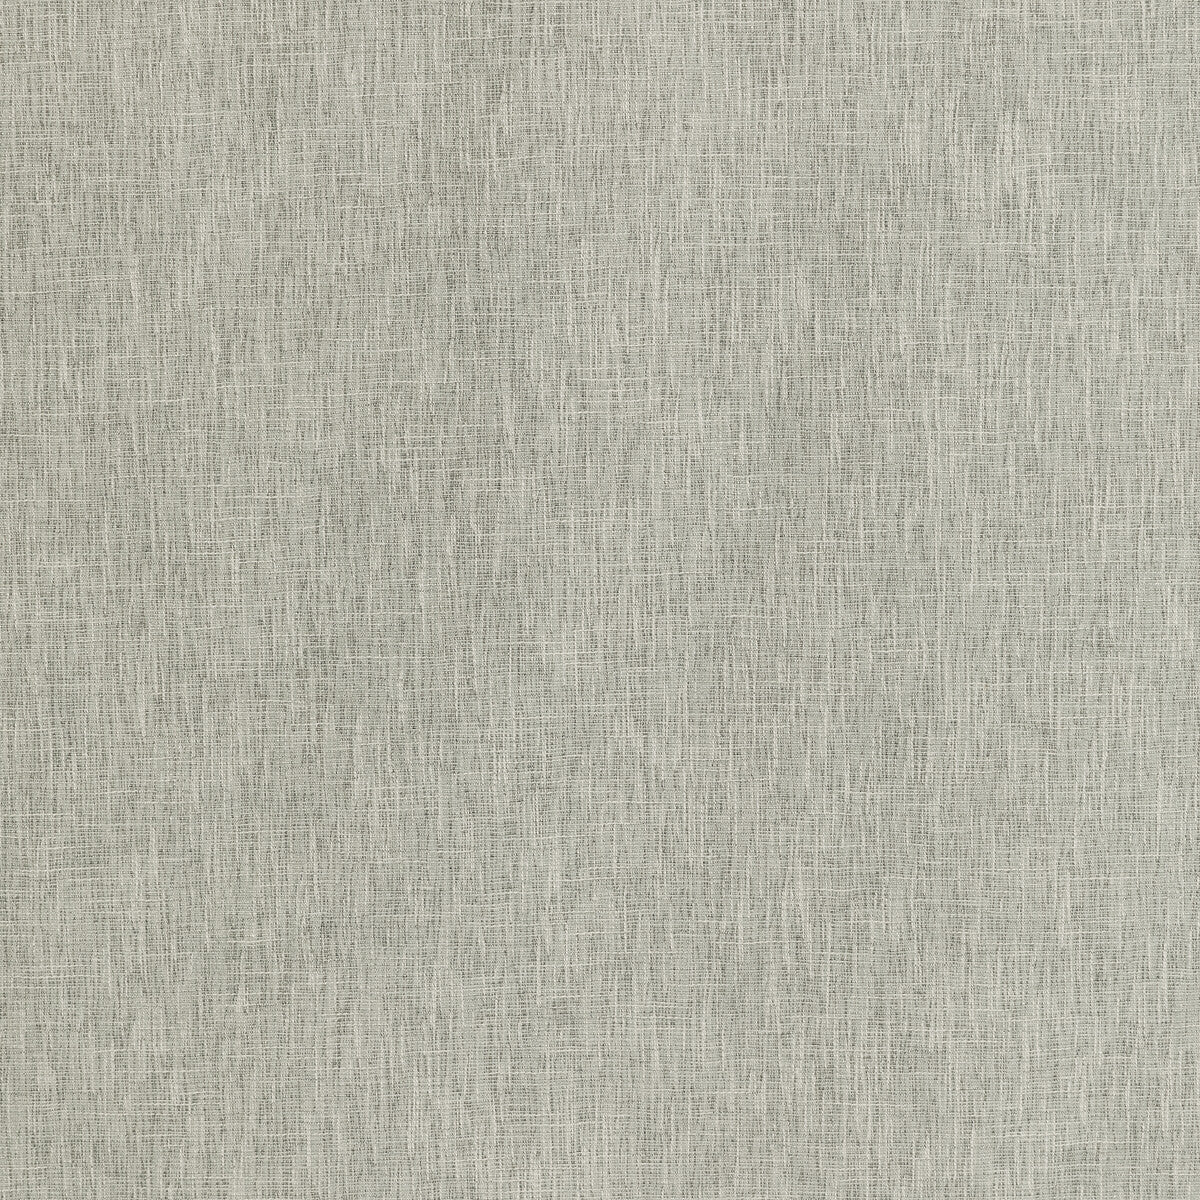 Maris fabric in pewter color - pattern 35923.11.0 - by Kravet Basics in the Monterey collection